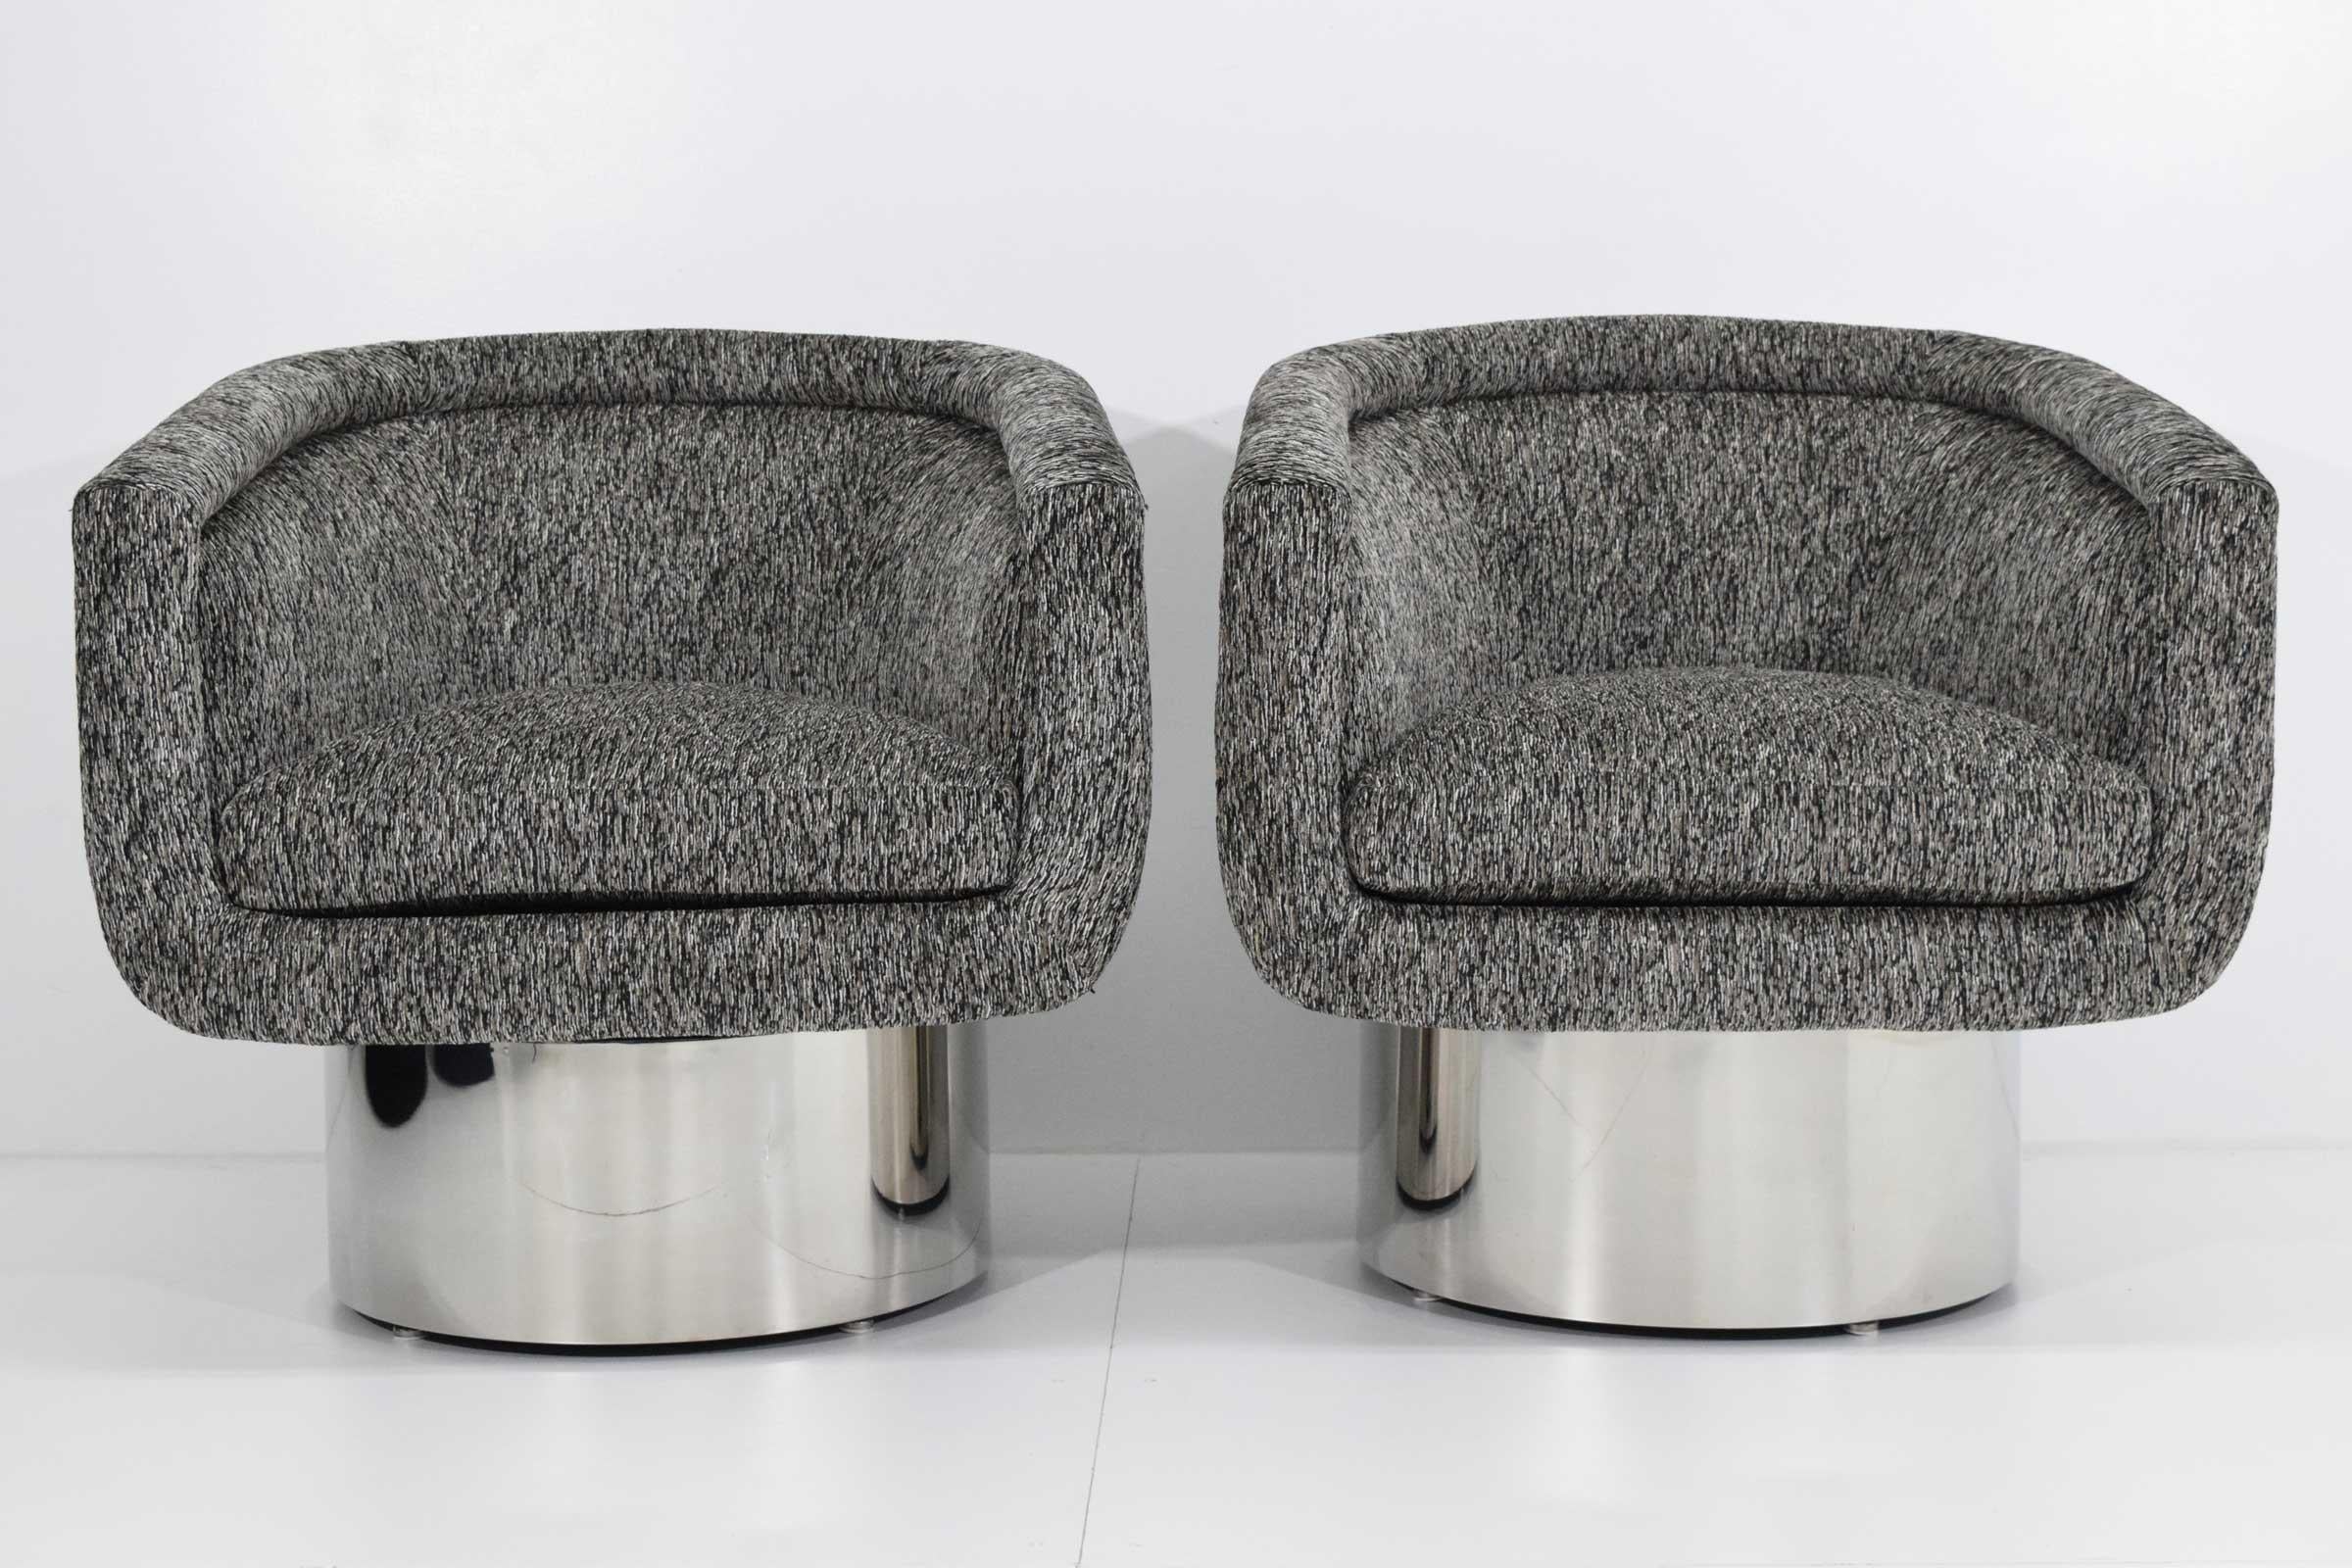 Pair of handsome tub chairs on steel clad round swivel pedestal base by Leon Rosen for Pace Collection. Swivel is self correcting. These have new upholstery on them by Romo Black.